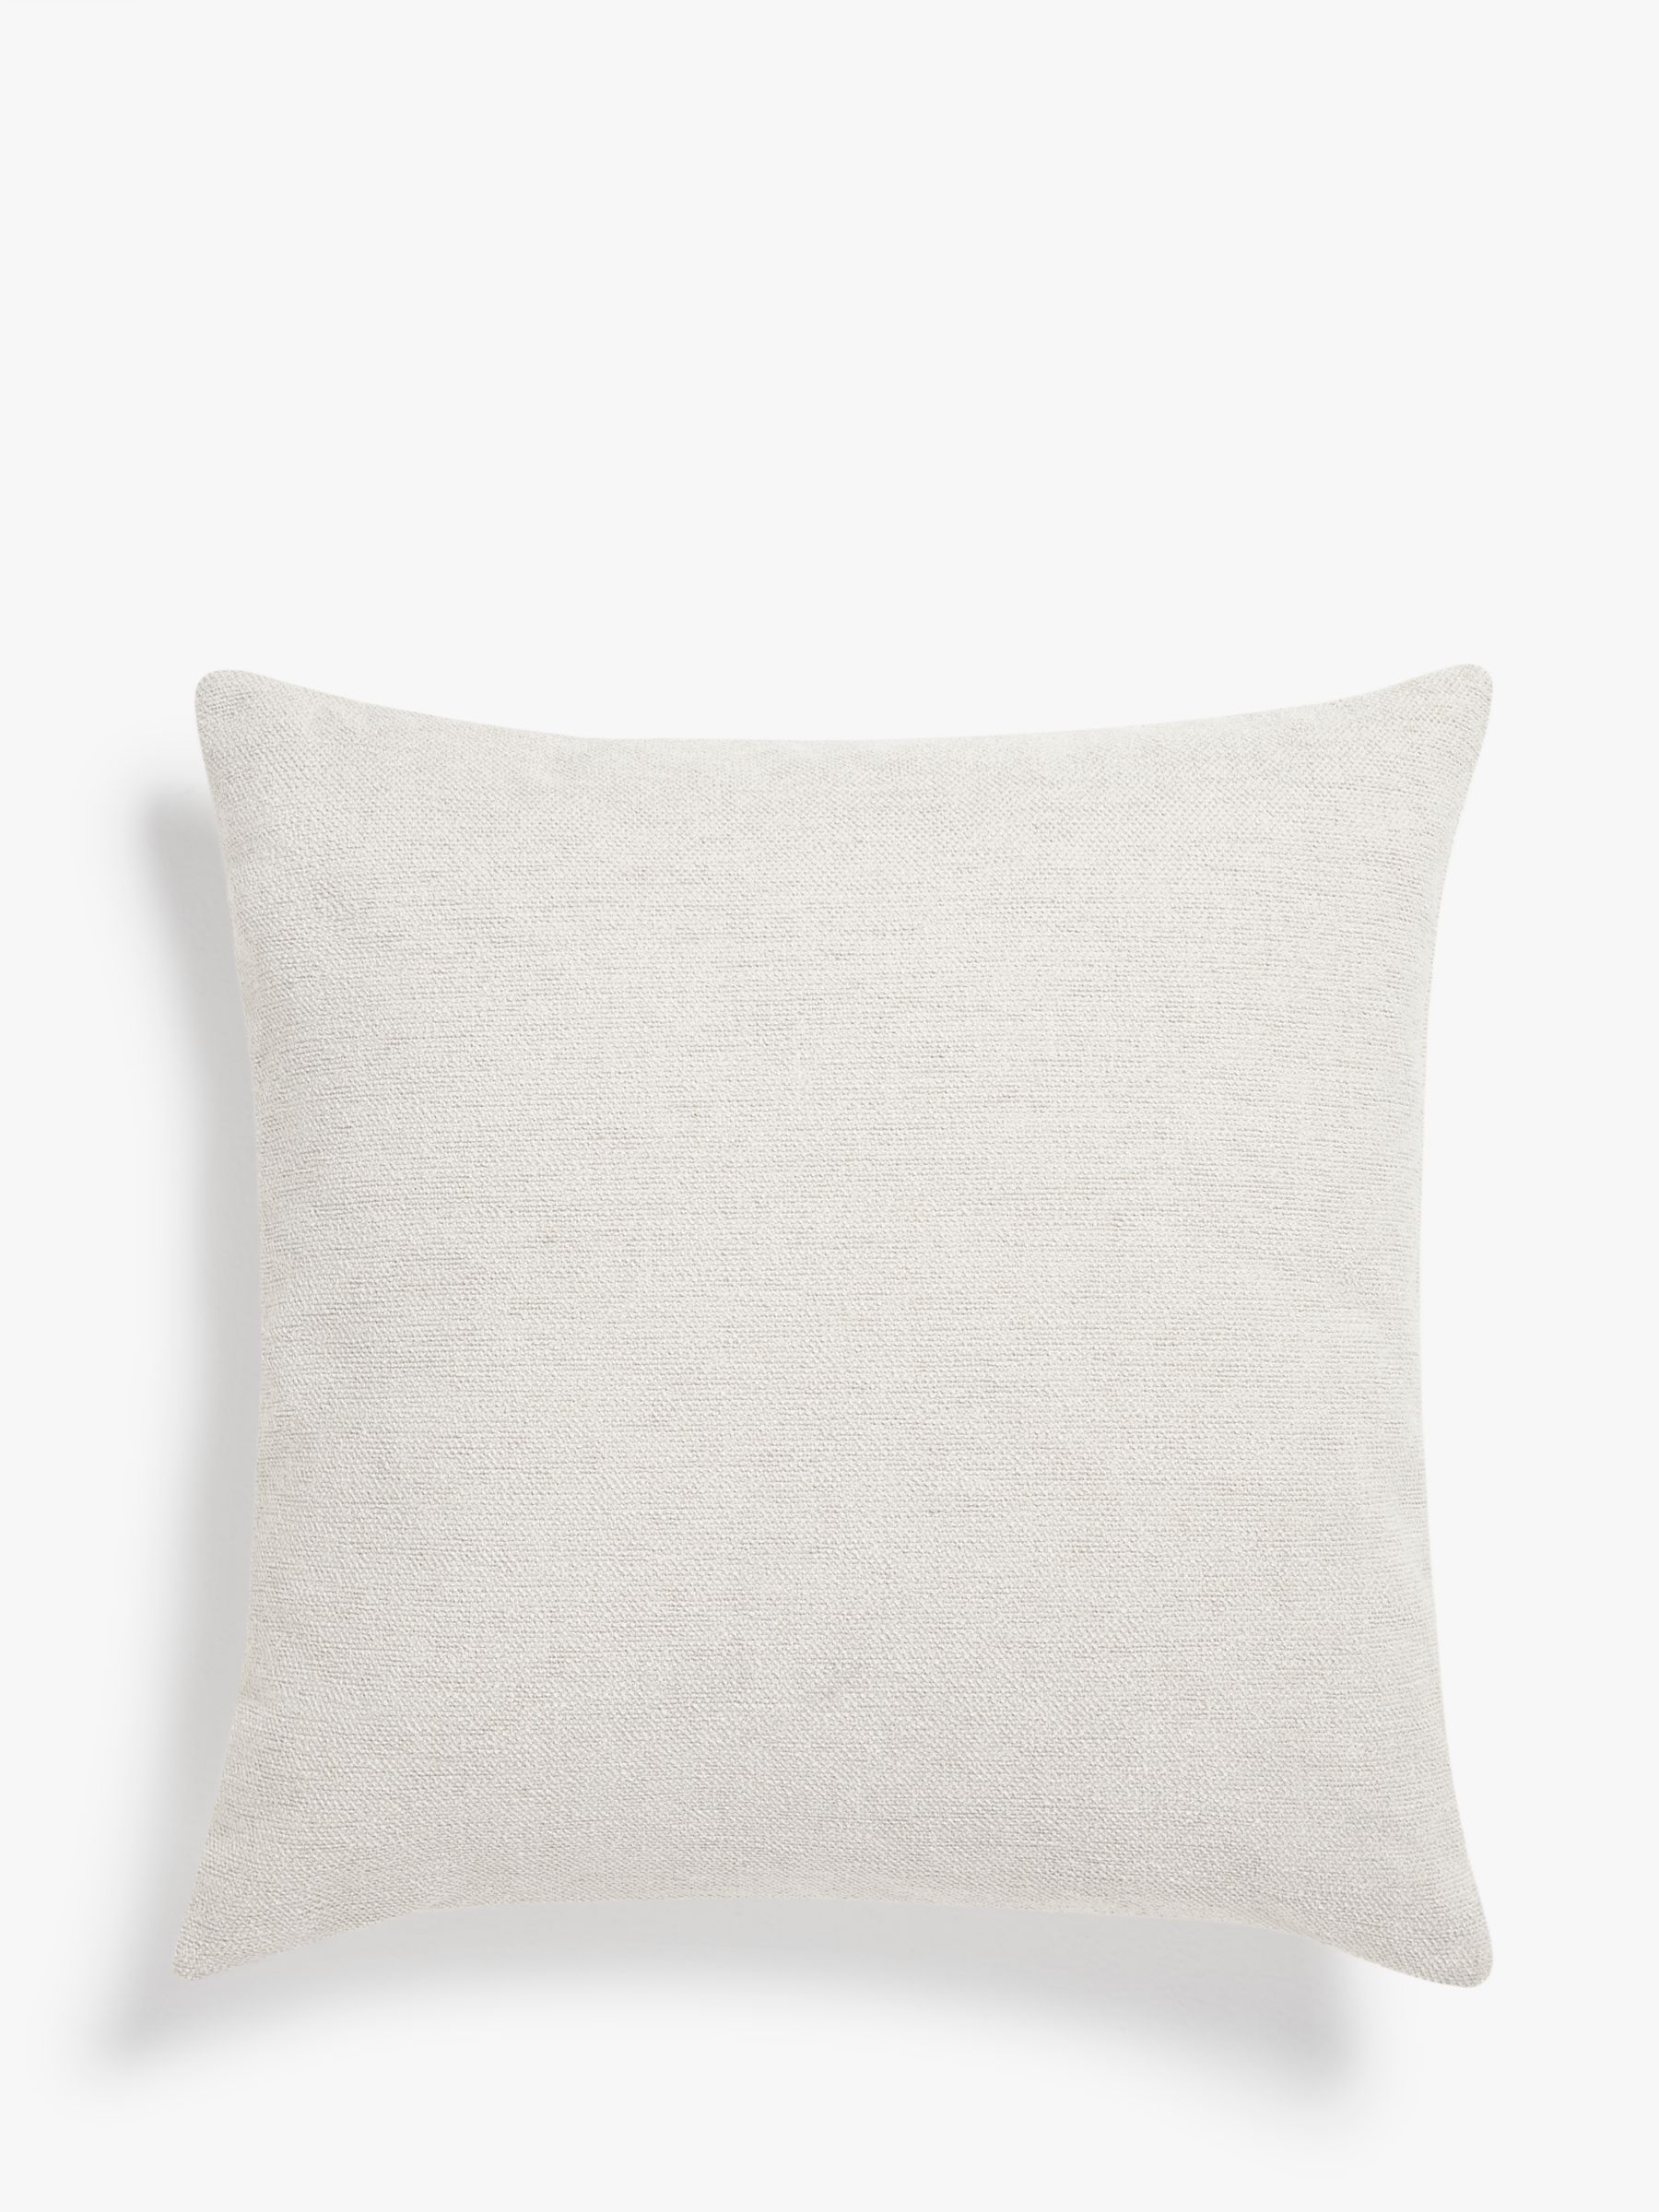 Design Project by John Lewis No.033 Cushion, White